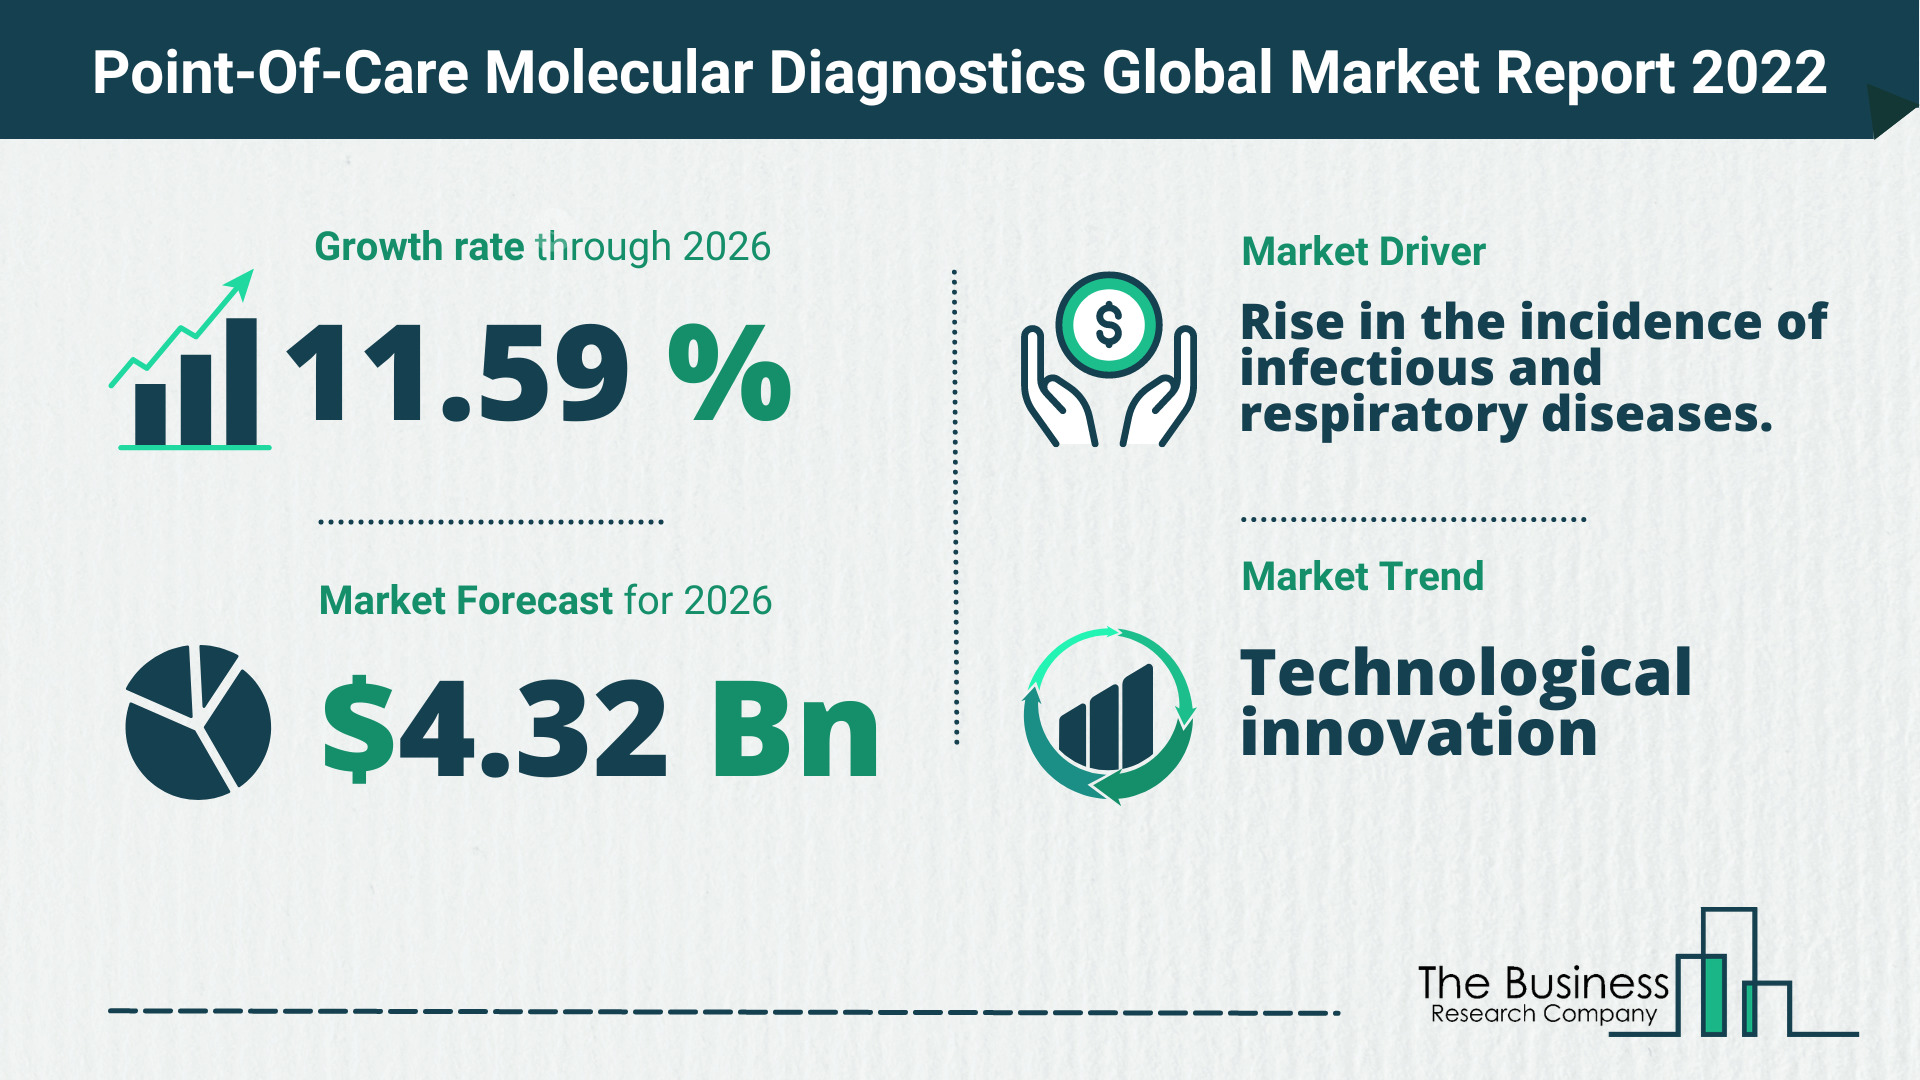 What Is The Point-Of-Care Molecular Diagnostics Market Overview In 2022?